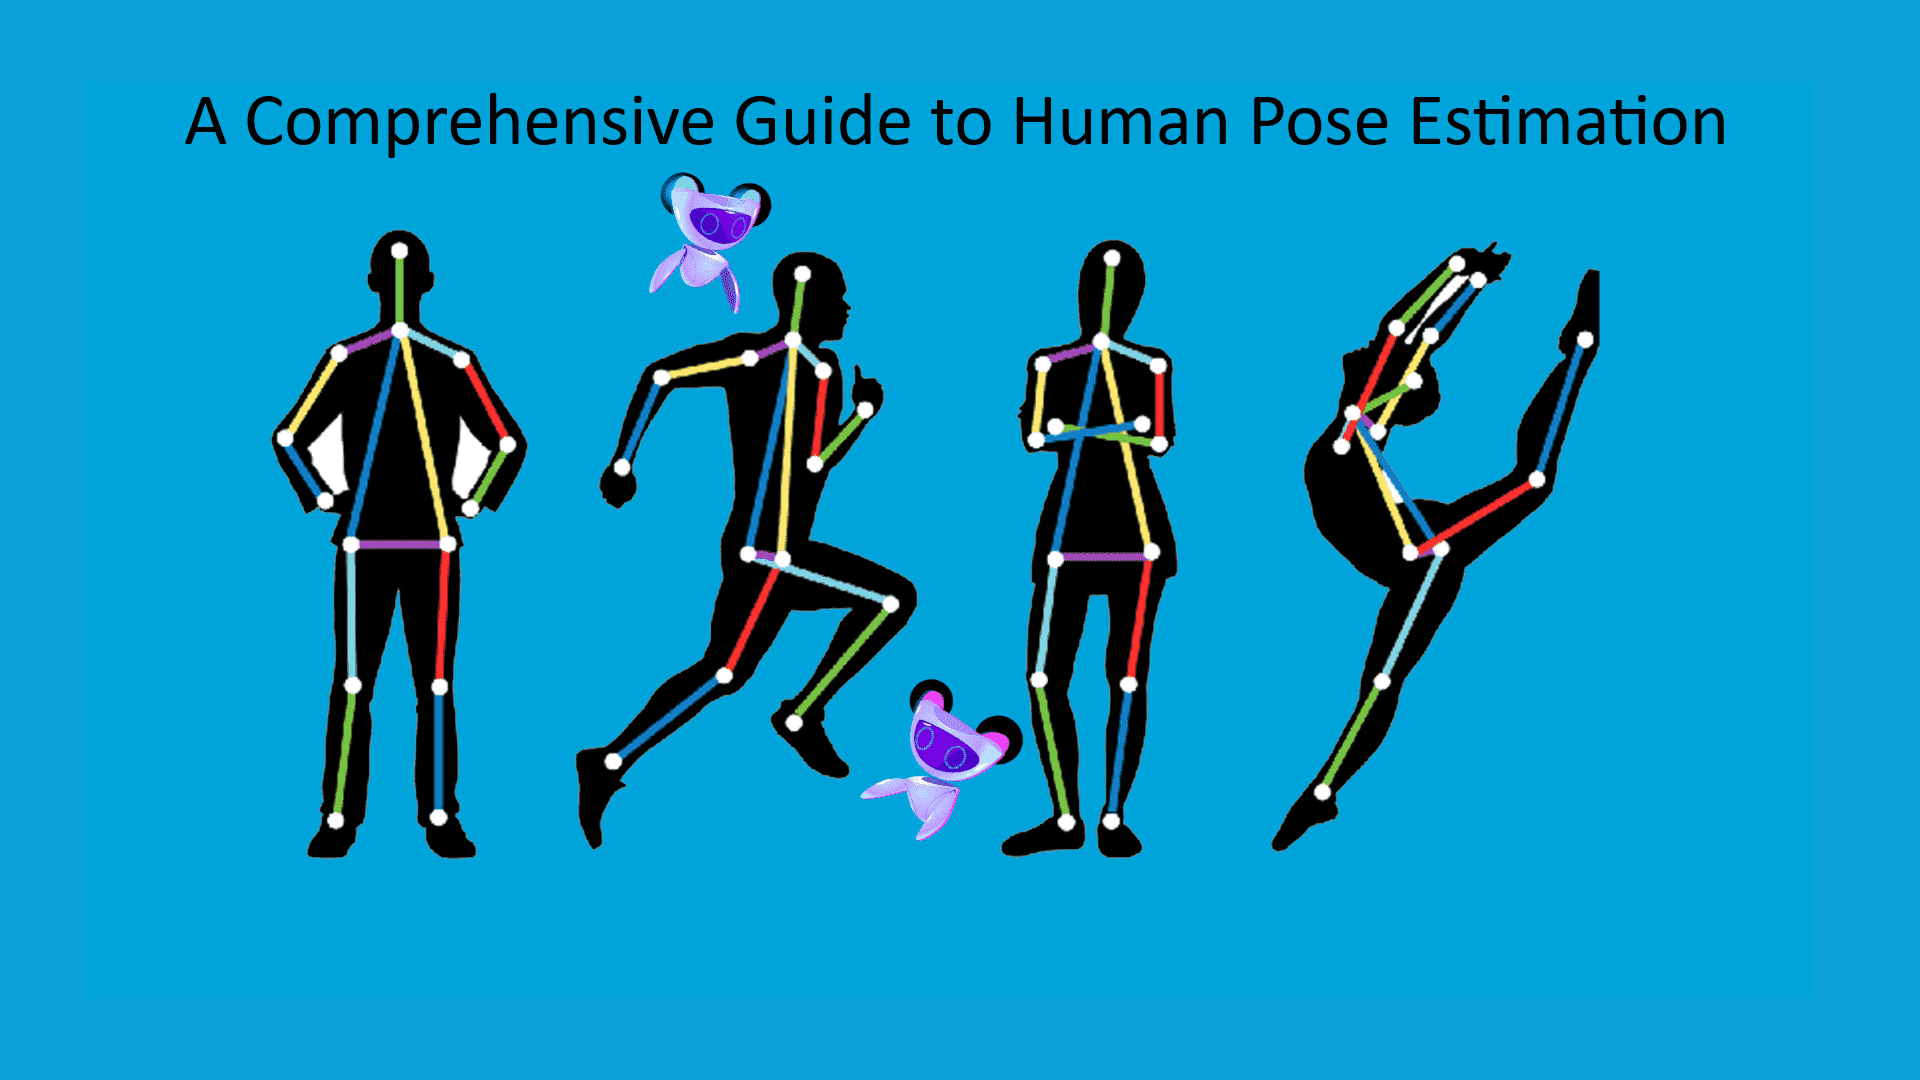 A Comprehensive Guide to Human Pose Estimation